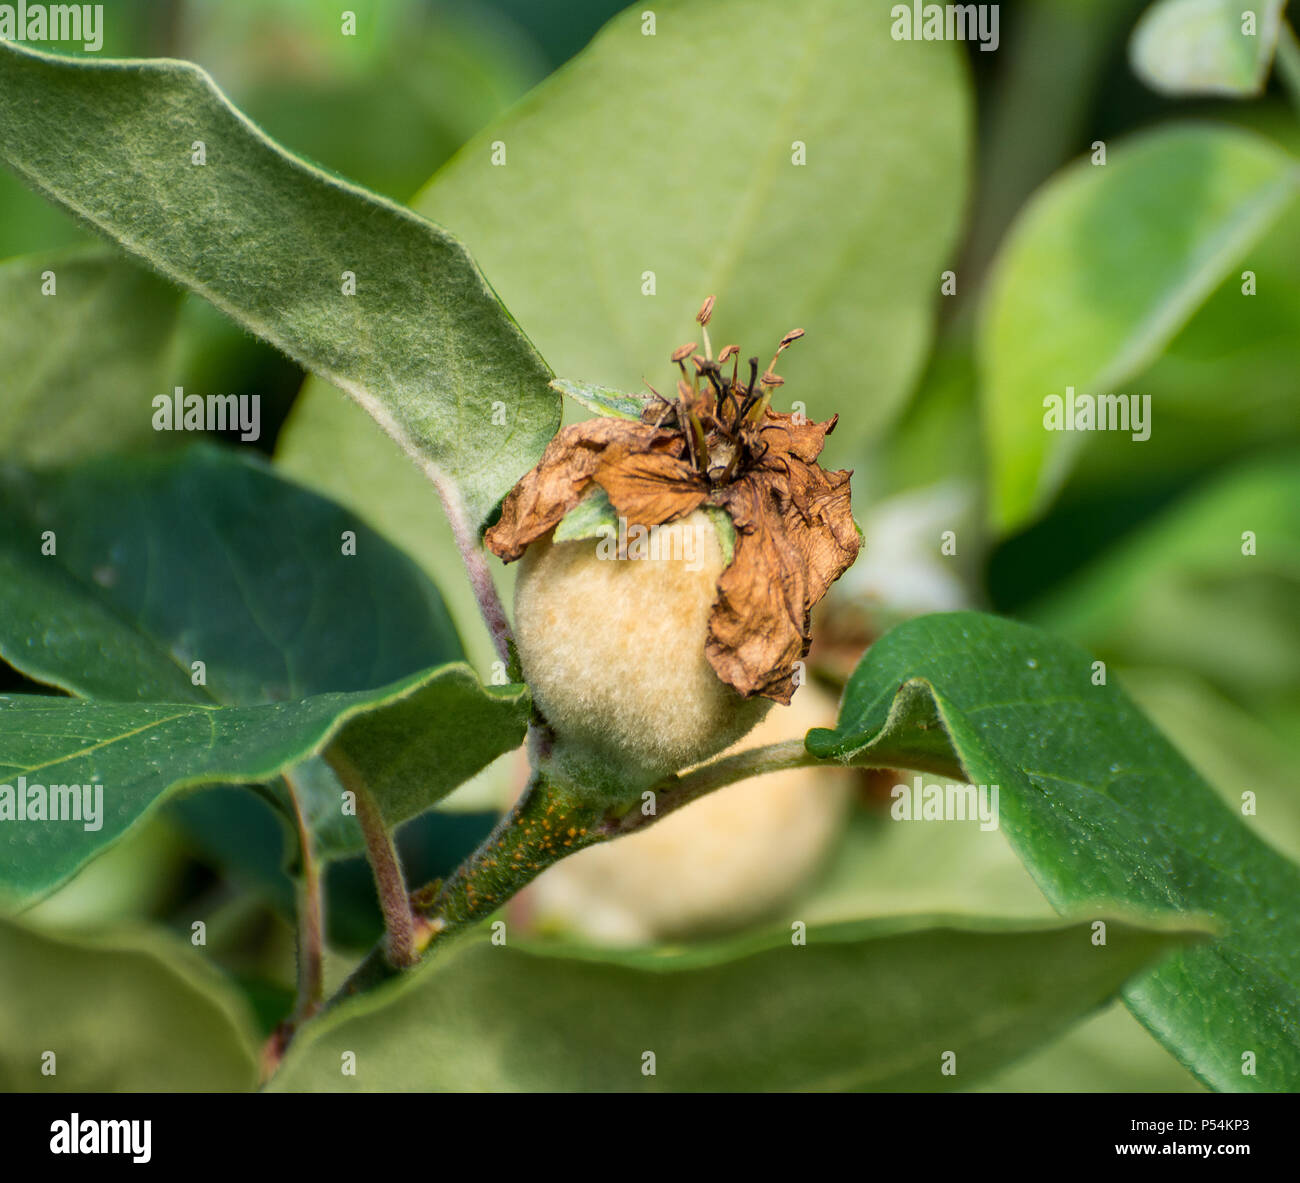 Eriobotrya japonica. young green fruit of the Japanese medlar on the branches. Loquat Young fruit. Loquat tree with immature fruit Stock Photo